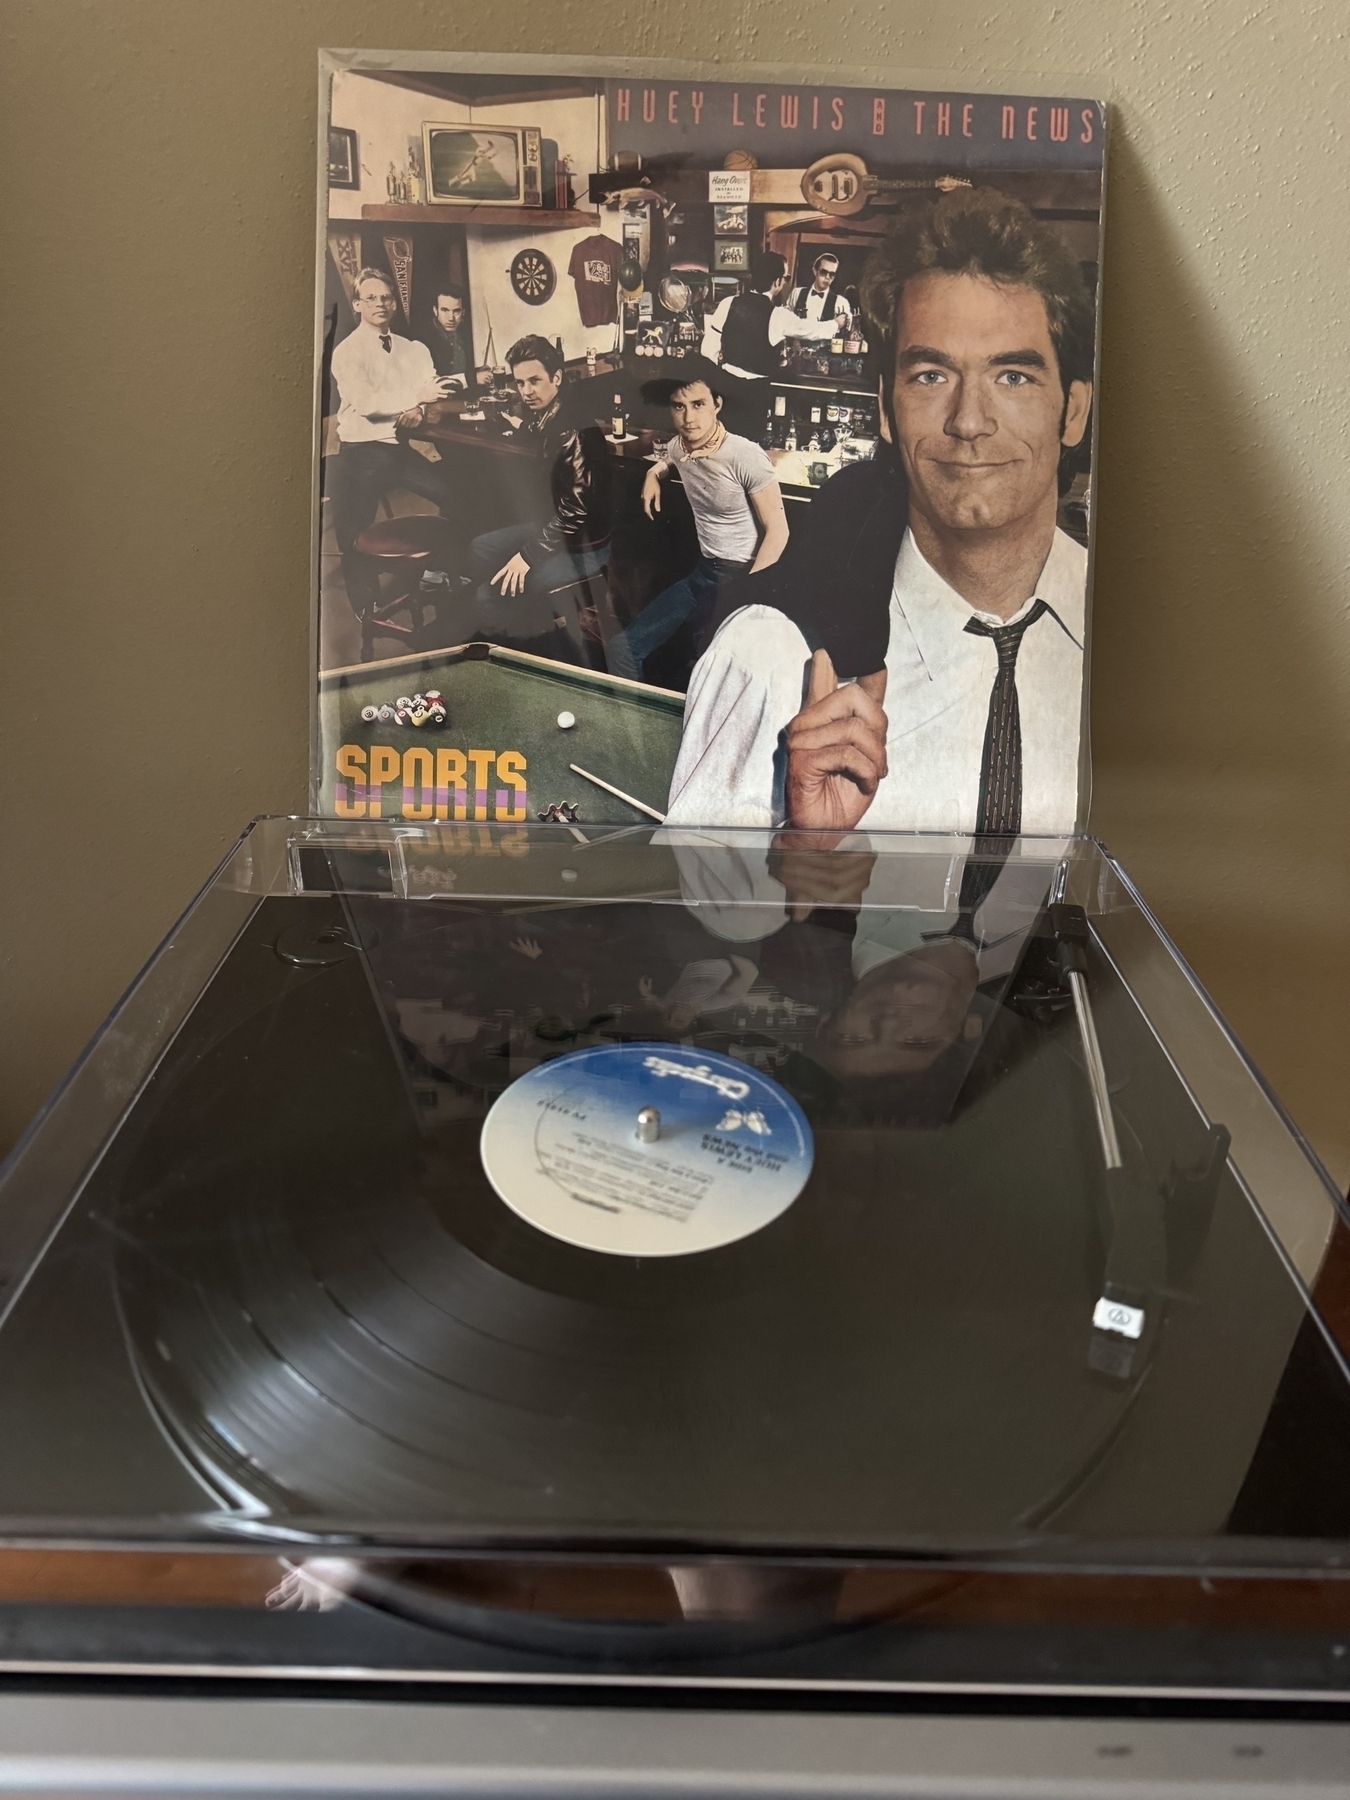 Sports by Huey Lewis and the News. 